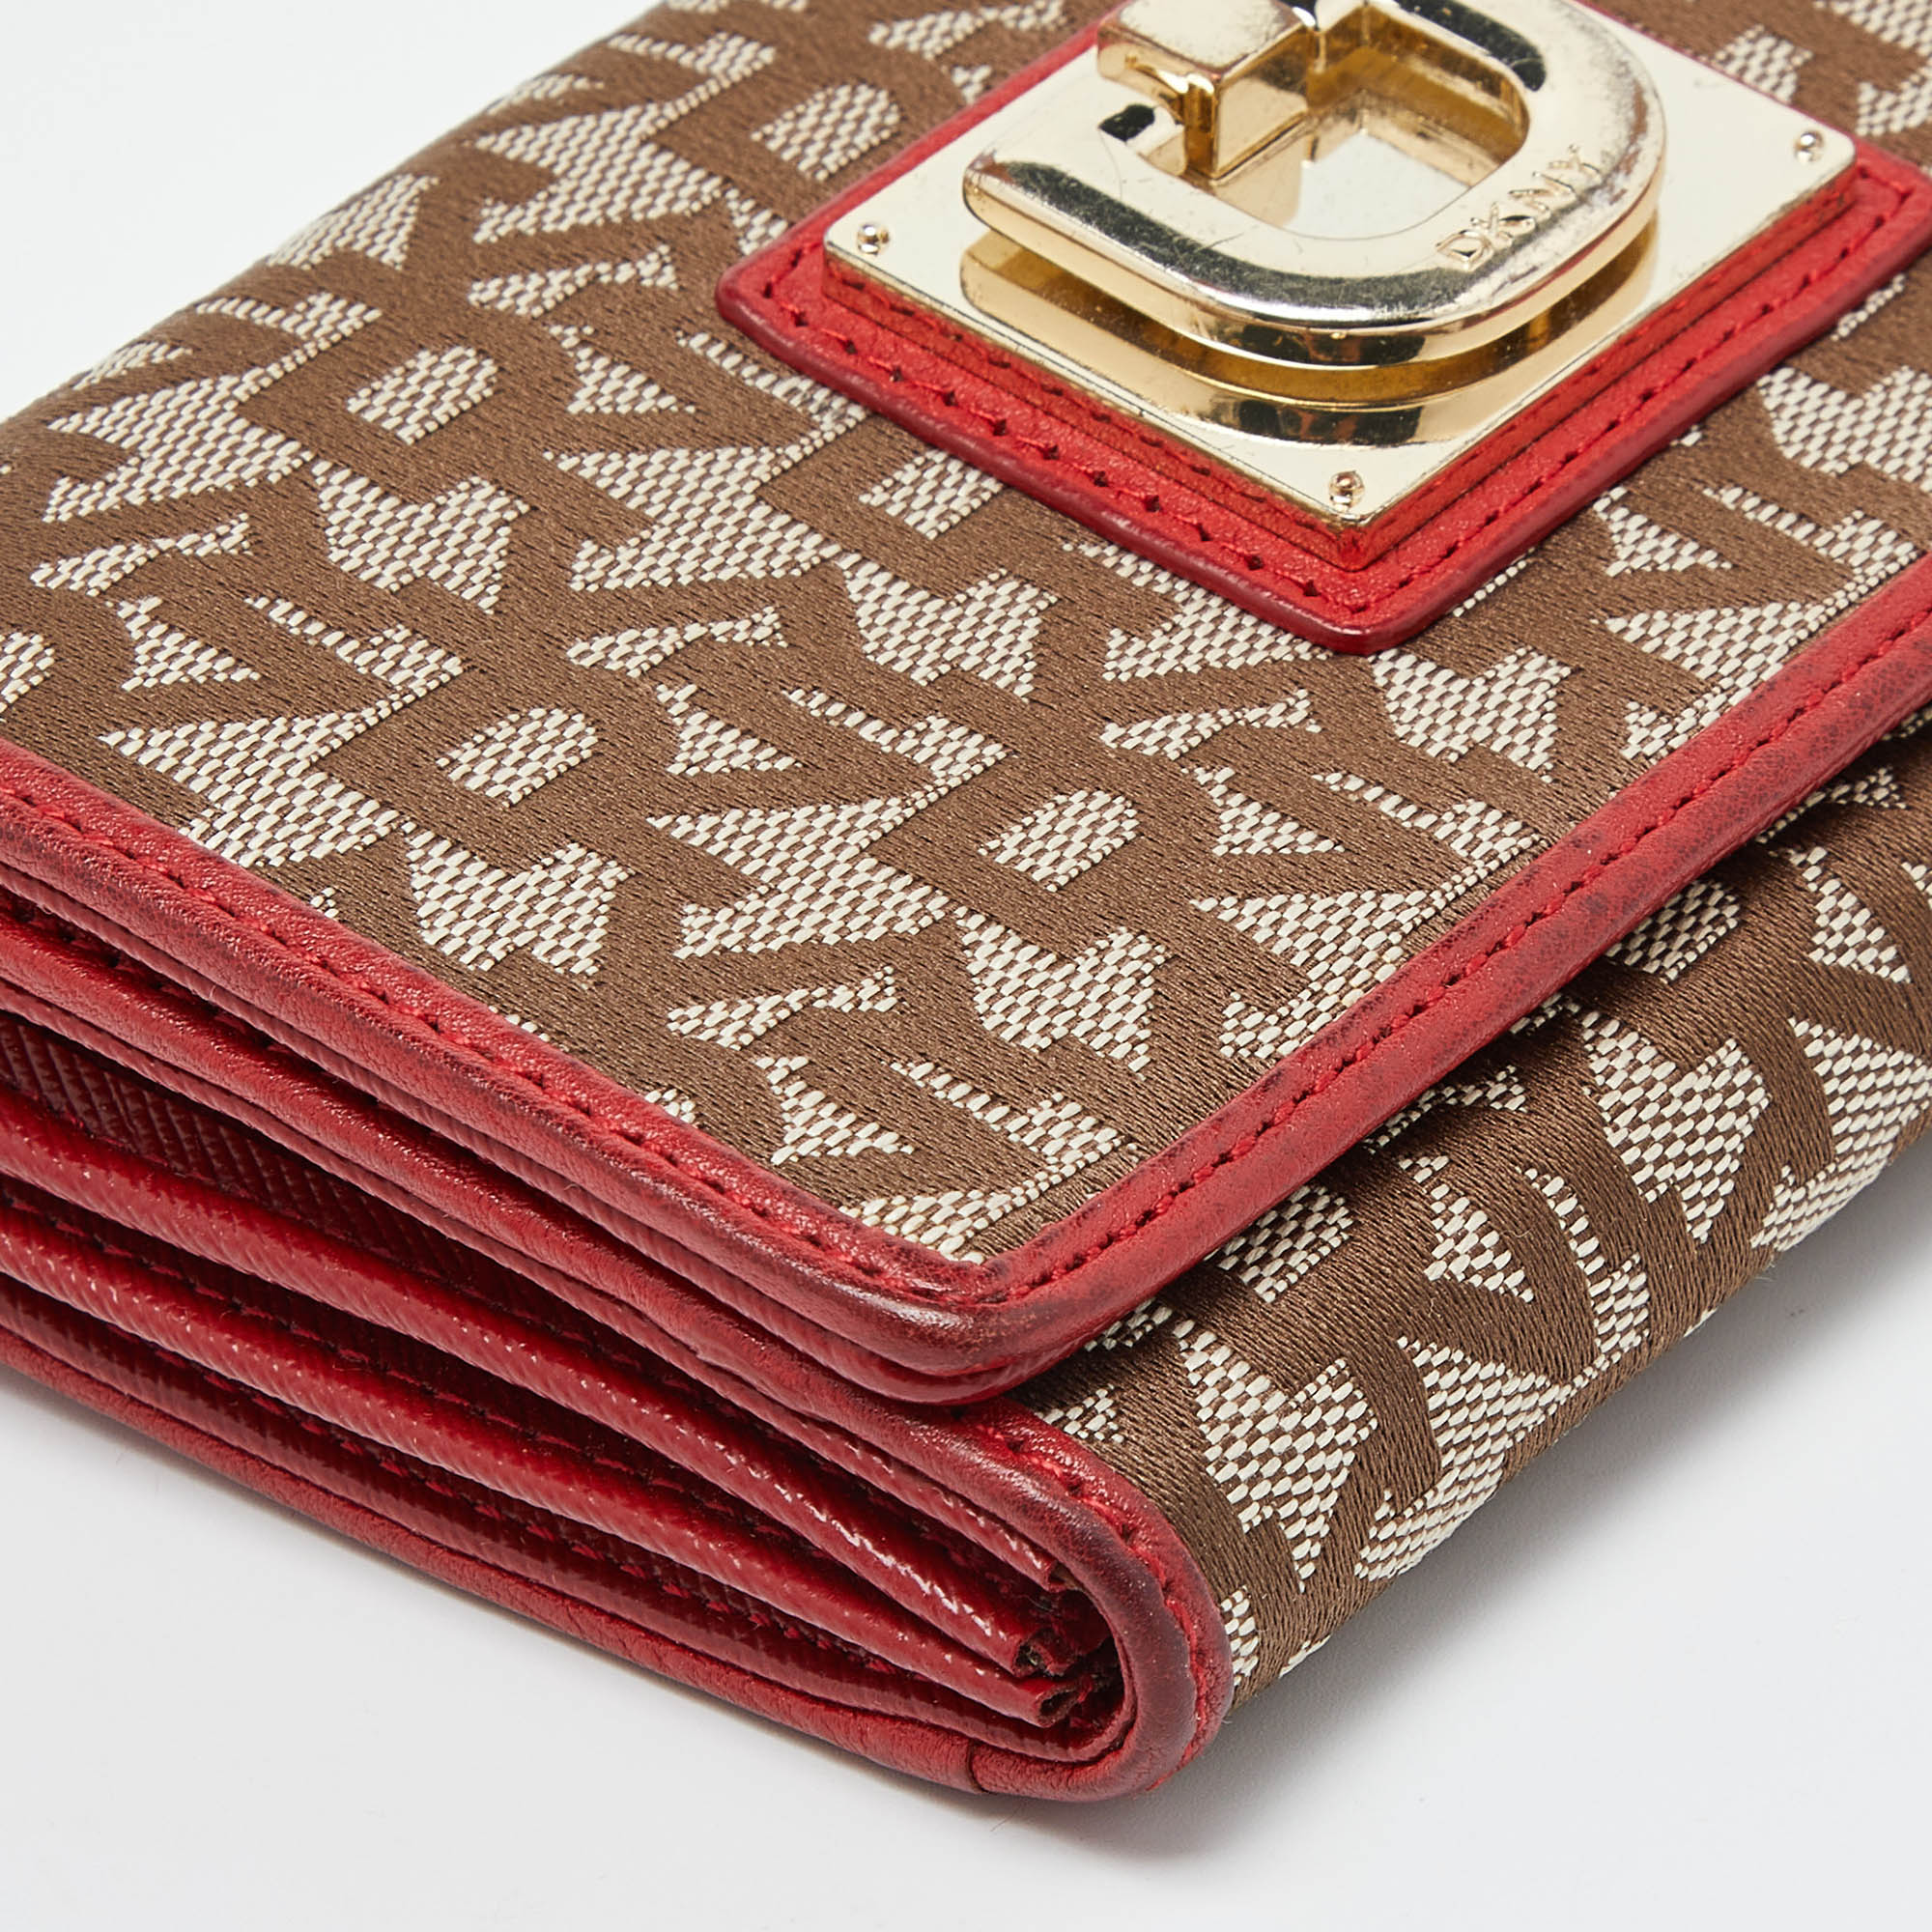 DKNY Beige/Red Signature Canvas And Leather French Wallet